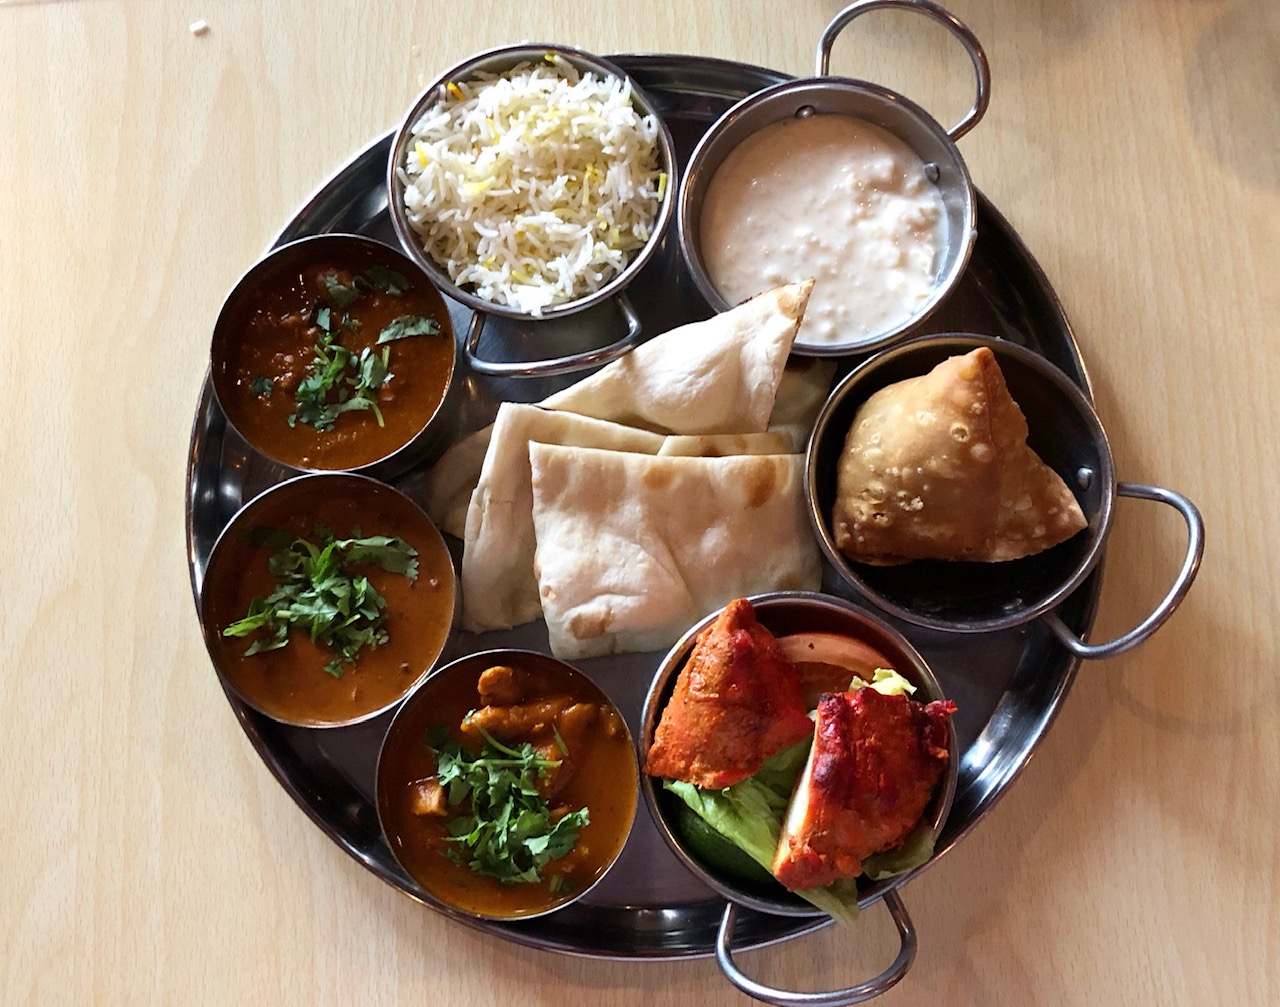 On a light wood table, there is a metal tray with small metal bowls of Indian dishes with four pieces of naan in the center. Photo by Alyssa Buckley.